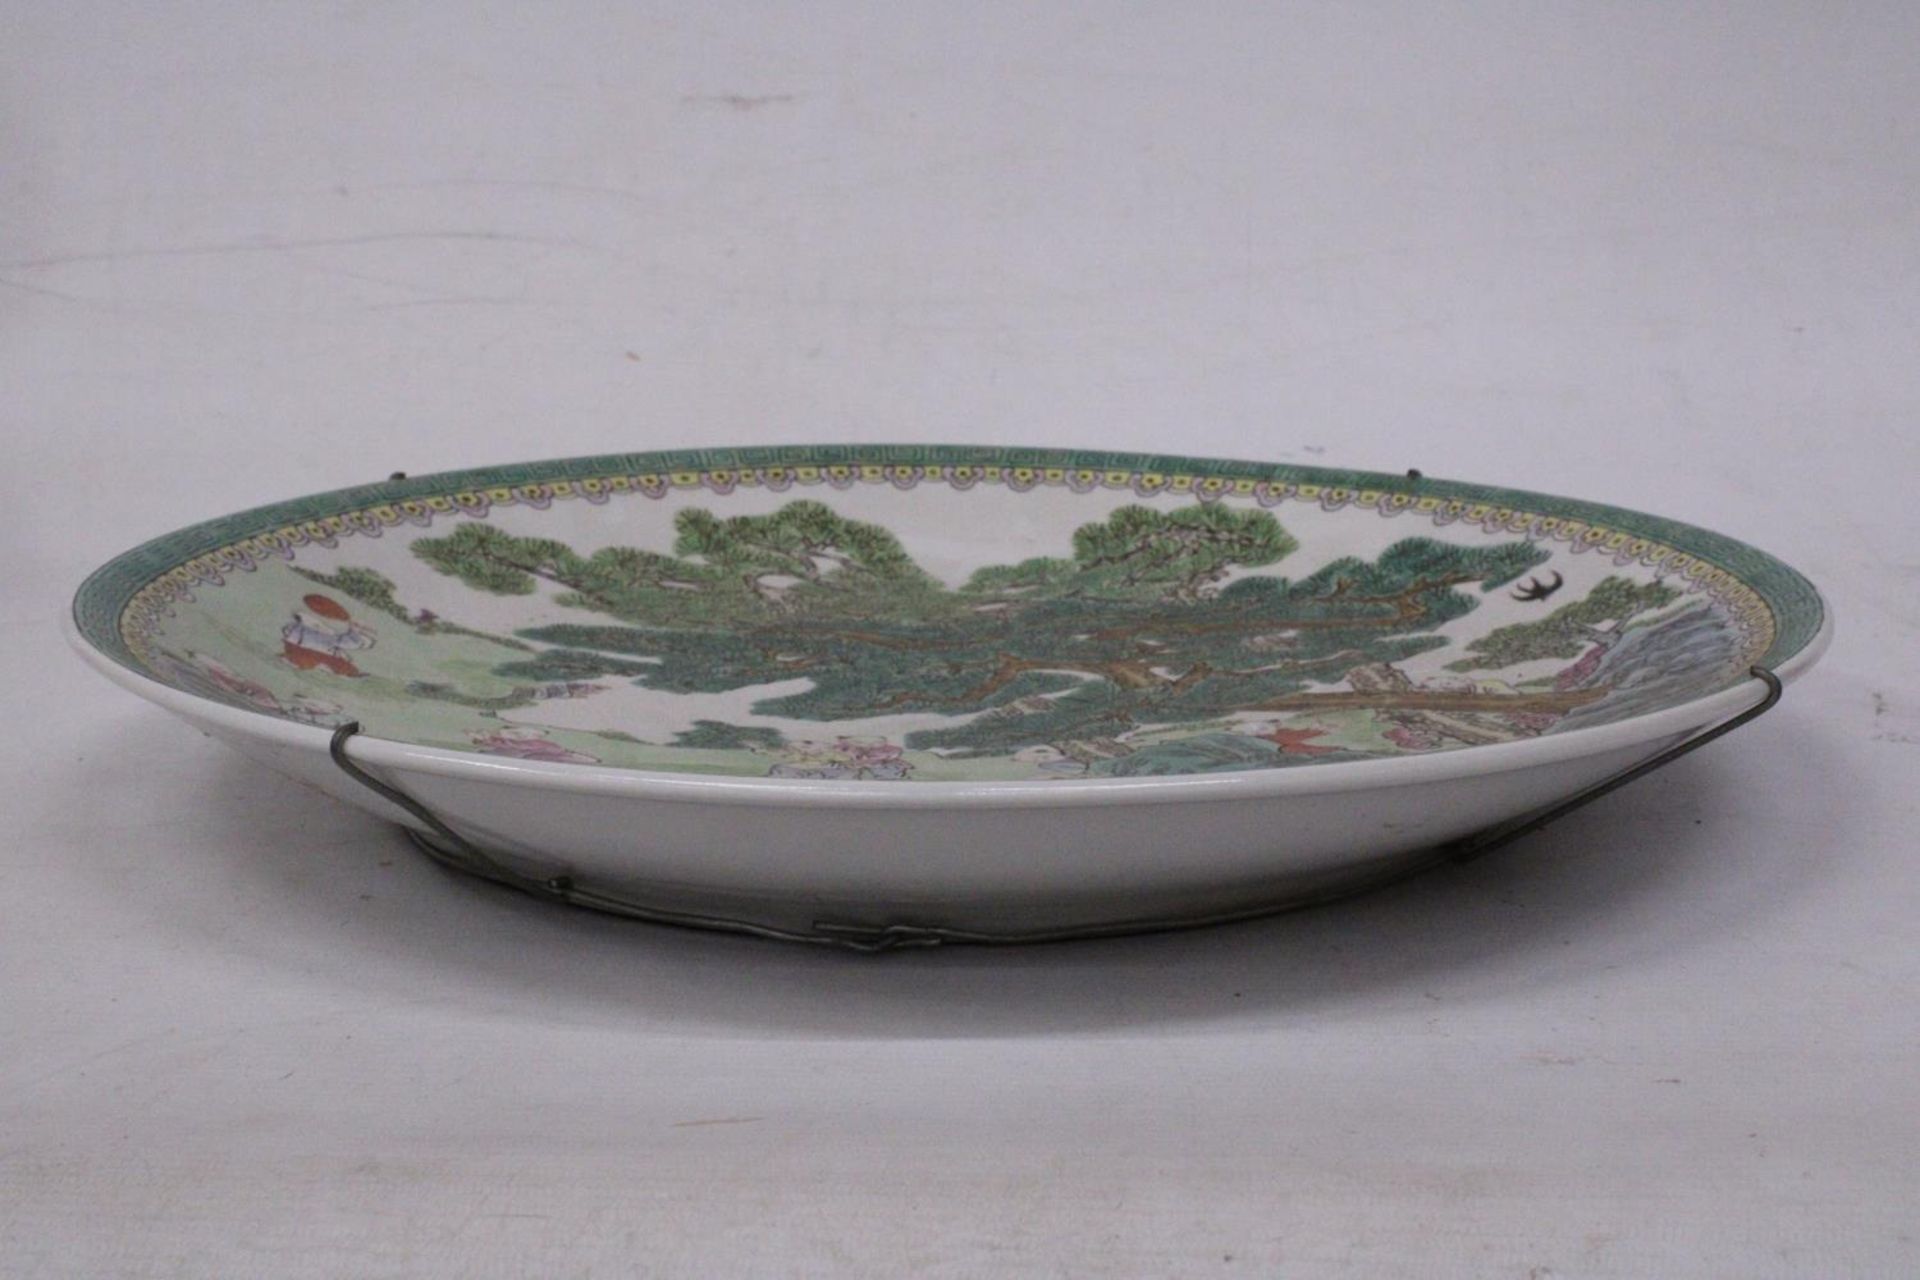 A LARGE CHINESE FAMILLE VERTE CHARGER WITH BOYS AT PLAY SCENE, FOUR CHARACTER MARK TO BASE - Image 3 of 6